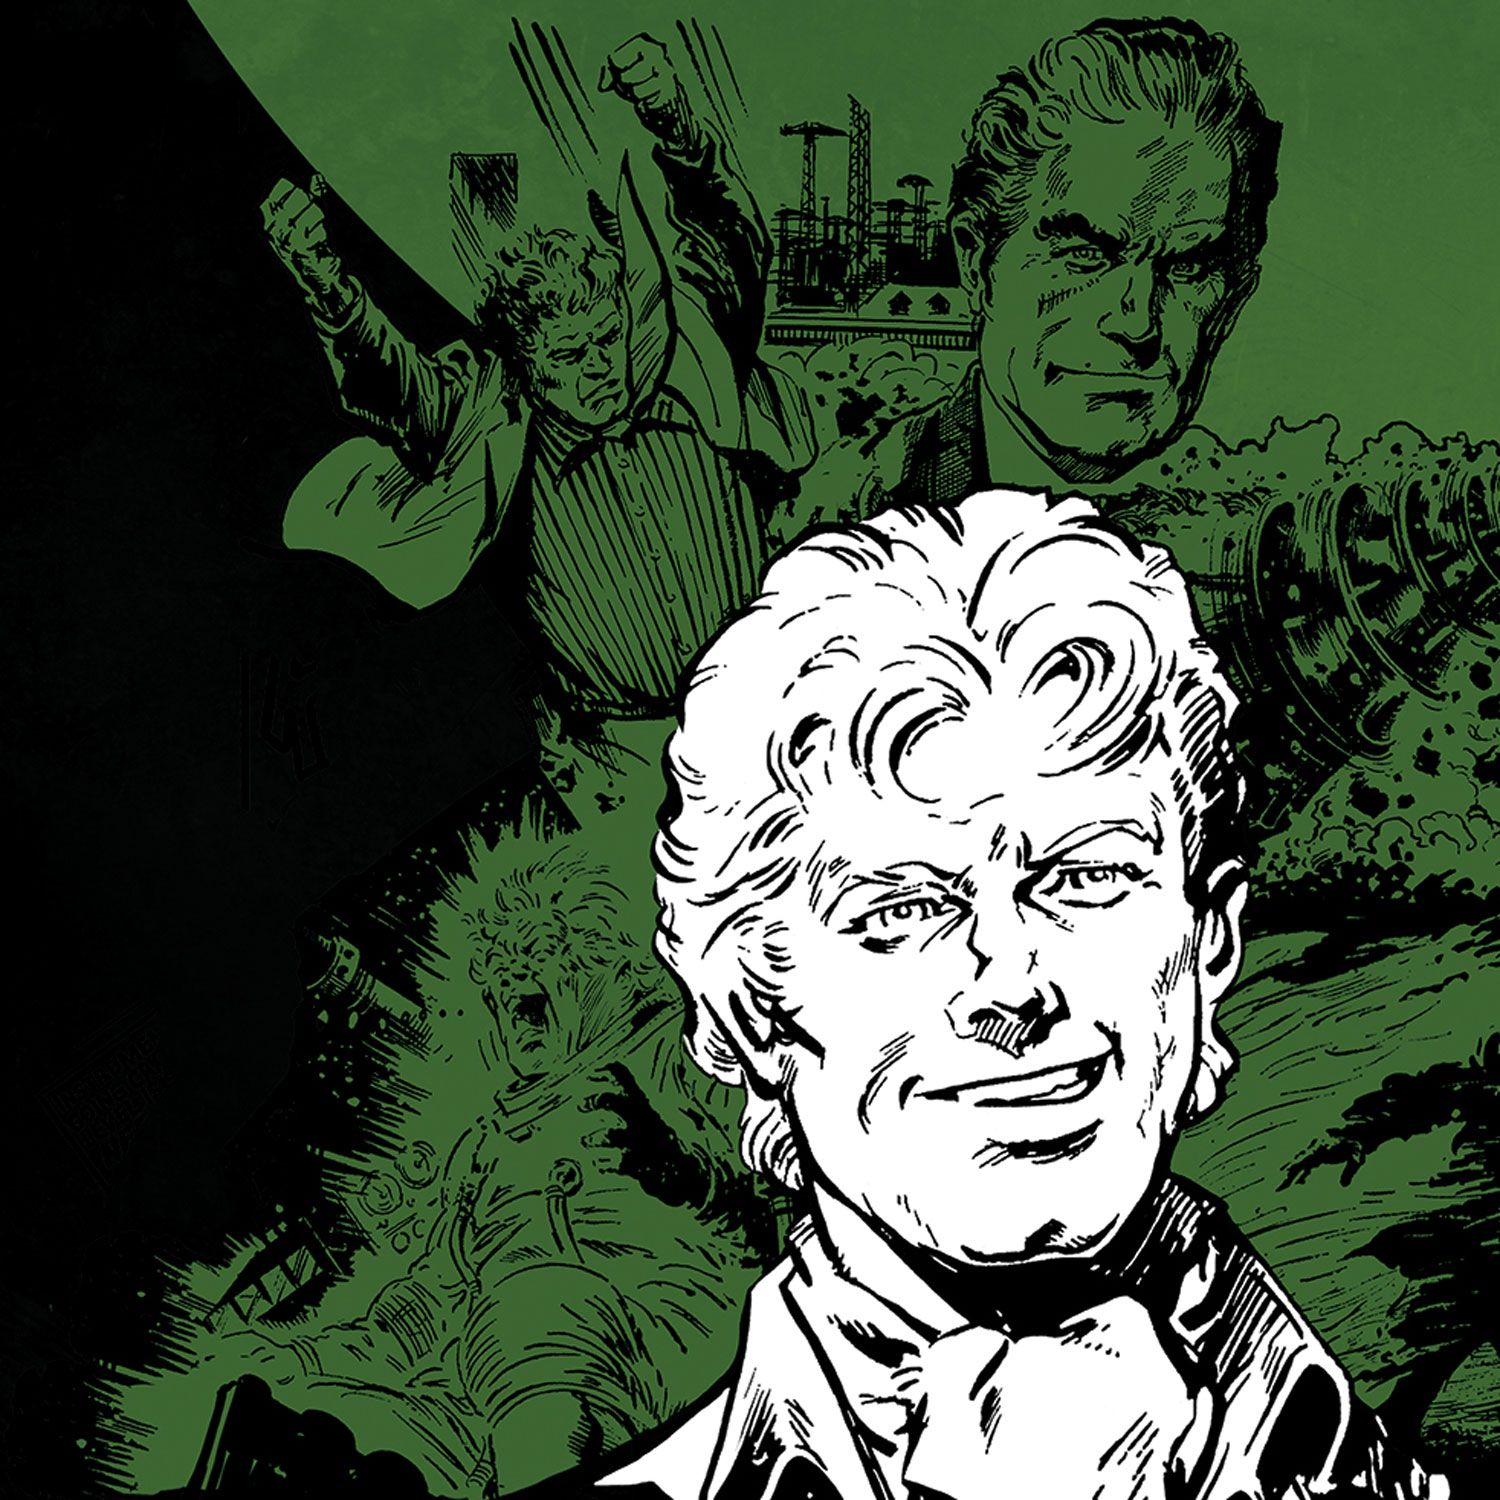 Sergeant Strong is back in action with new Hibernia Comics collection